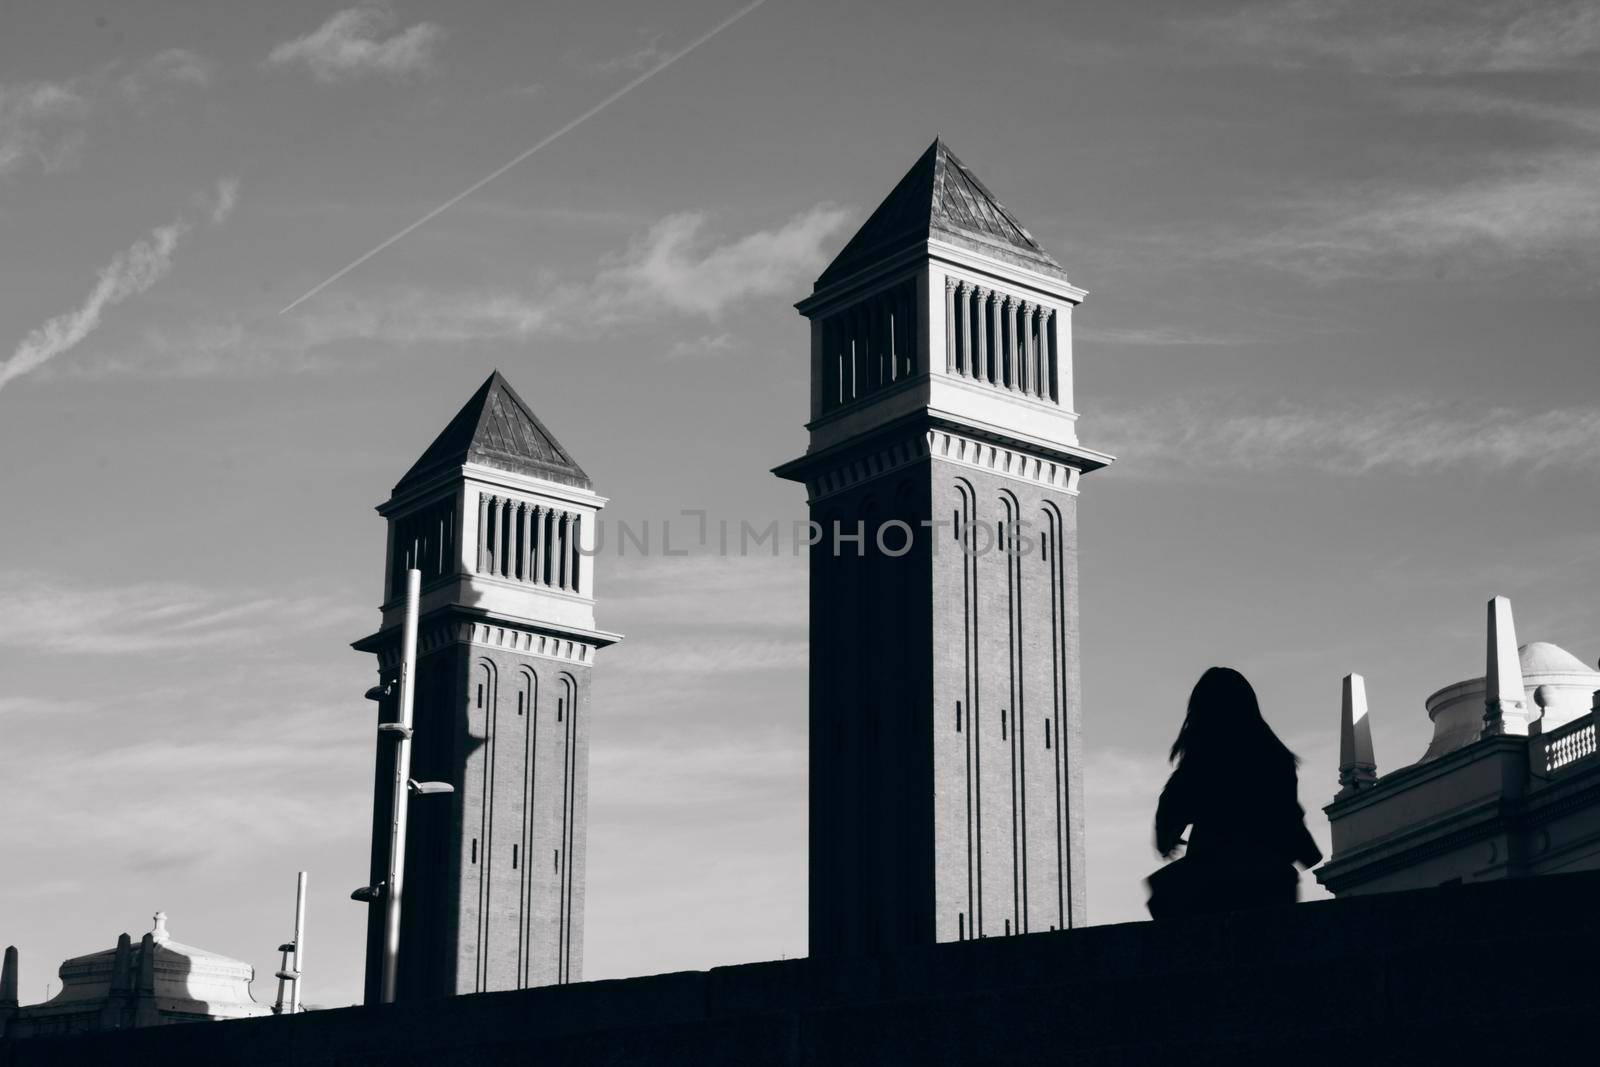 Two towers in Spain square in Barcelona and a little girl's silhouette dancing